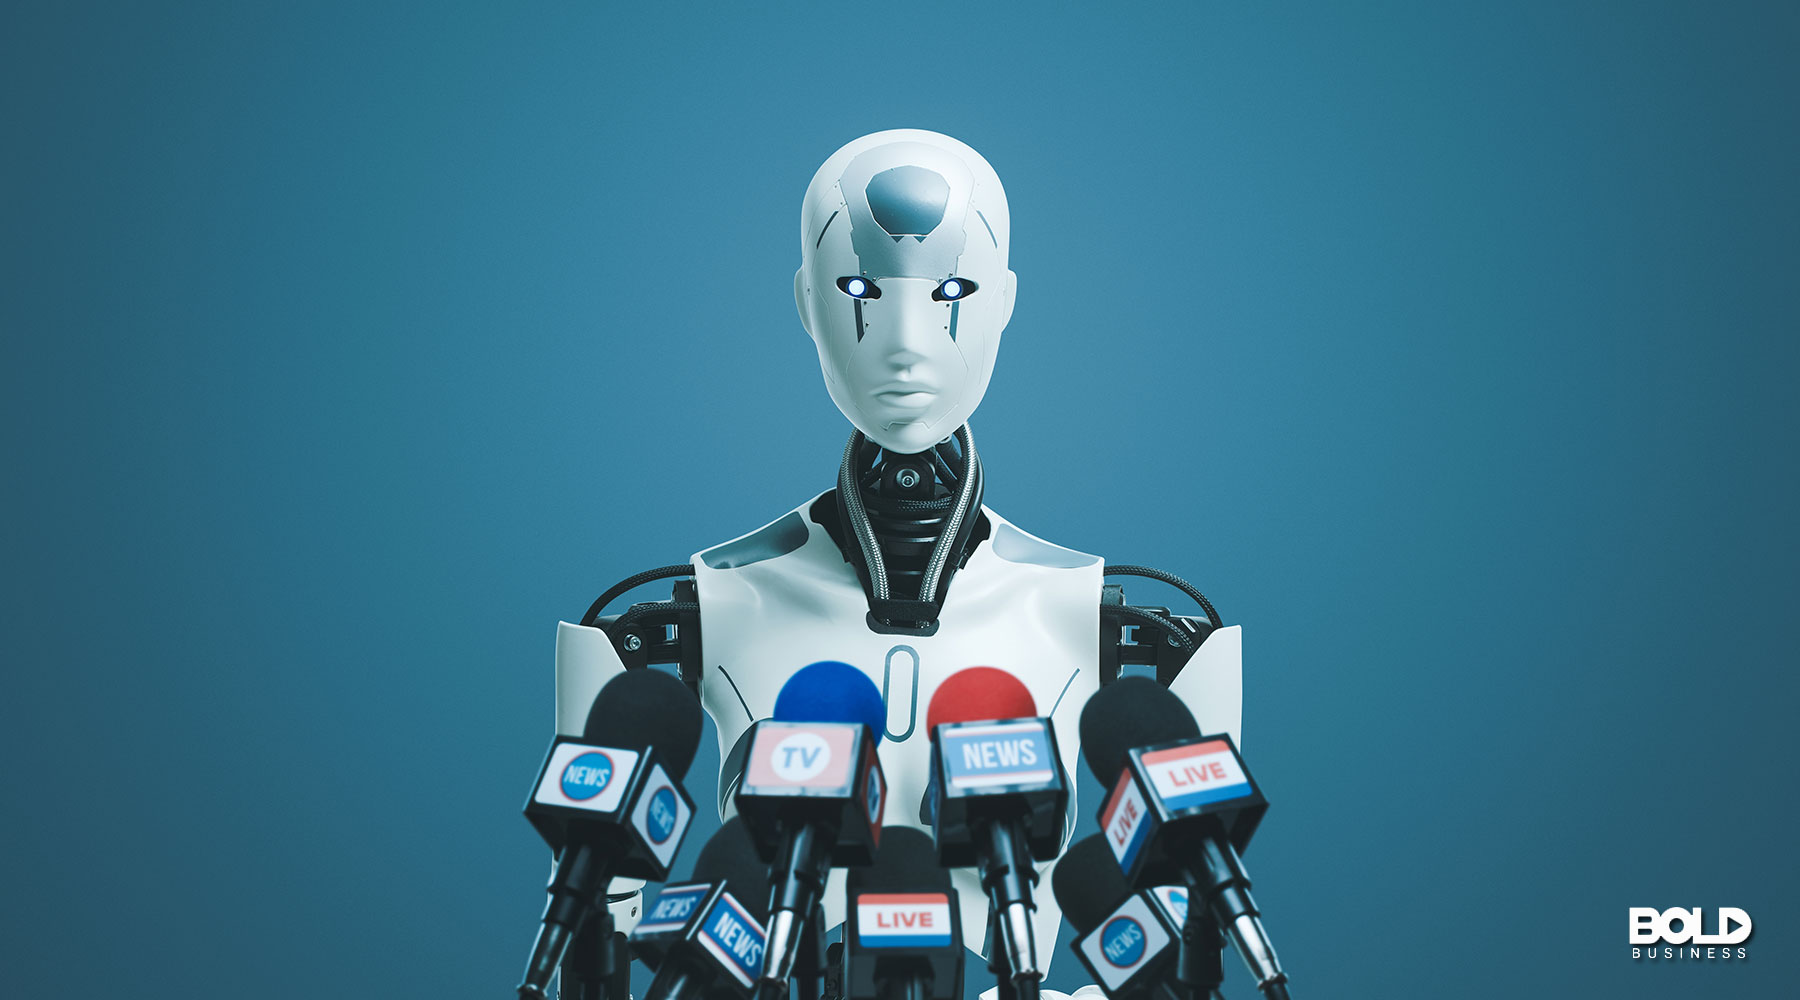 a robot candidate running for president